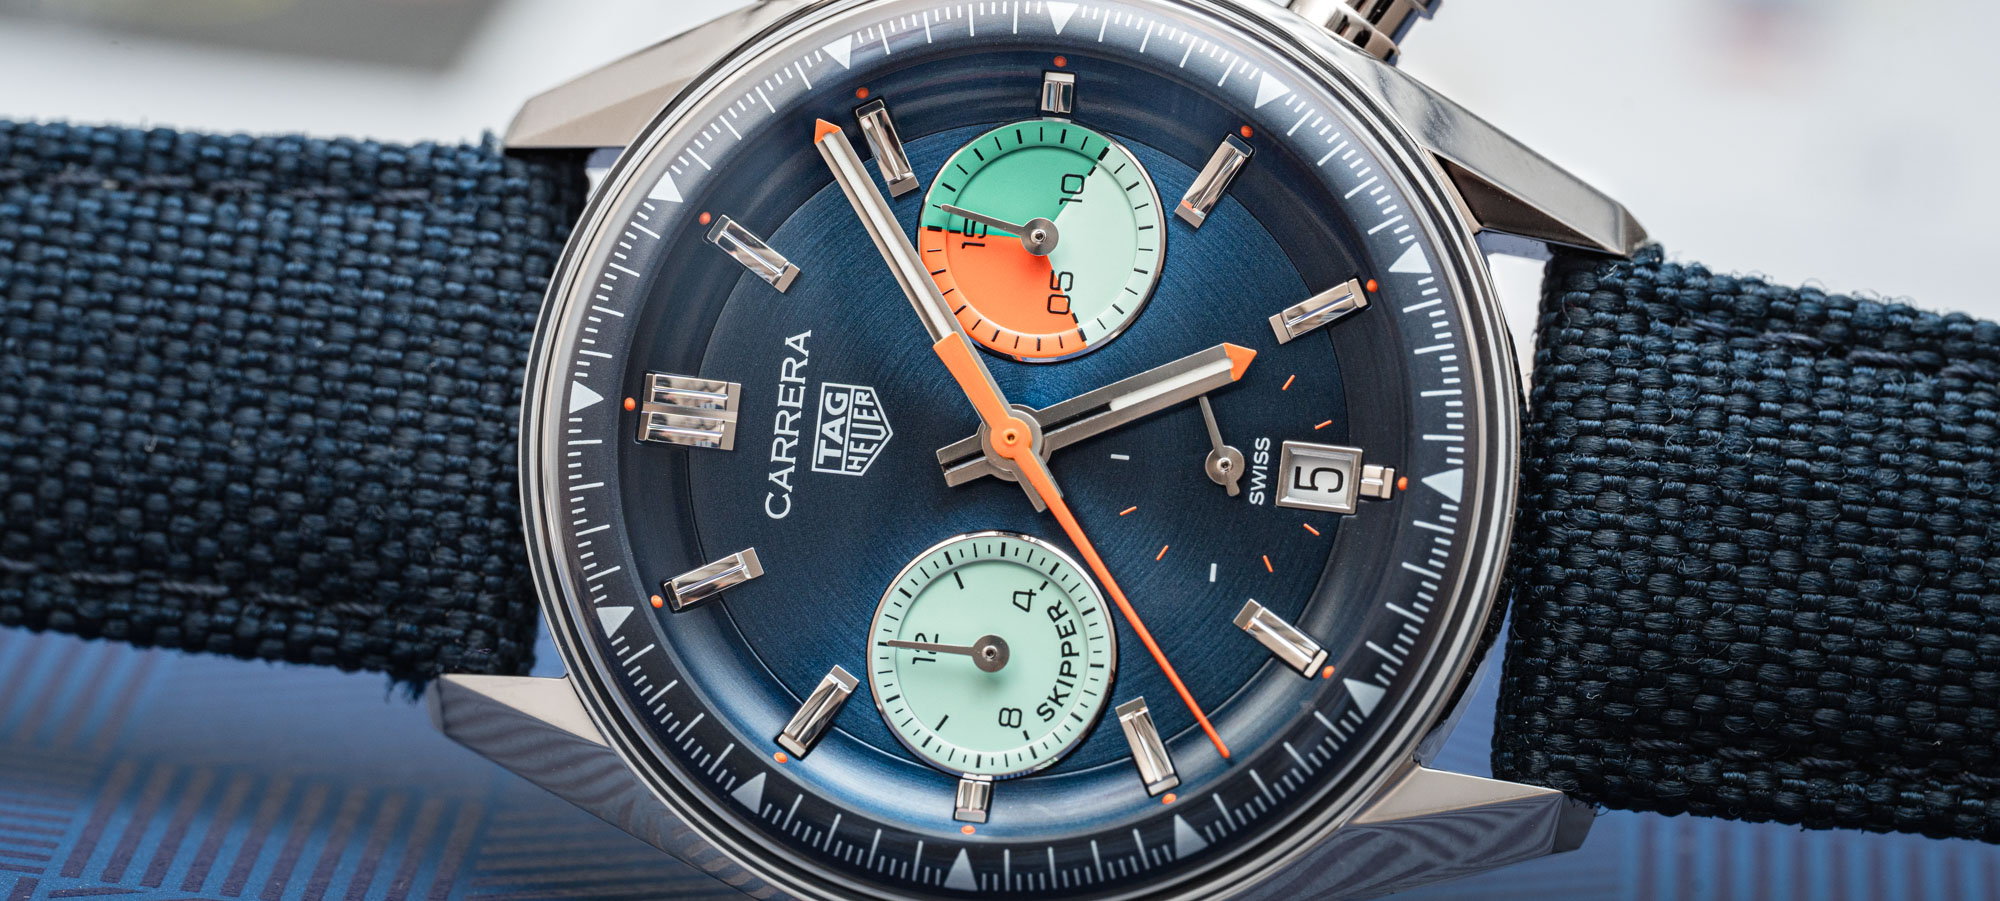 Tag Heuer Carrera Chronograph Glassbox Blue Dial Leather Strap